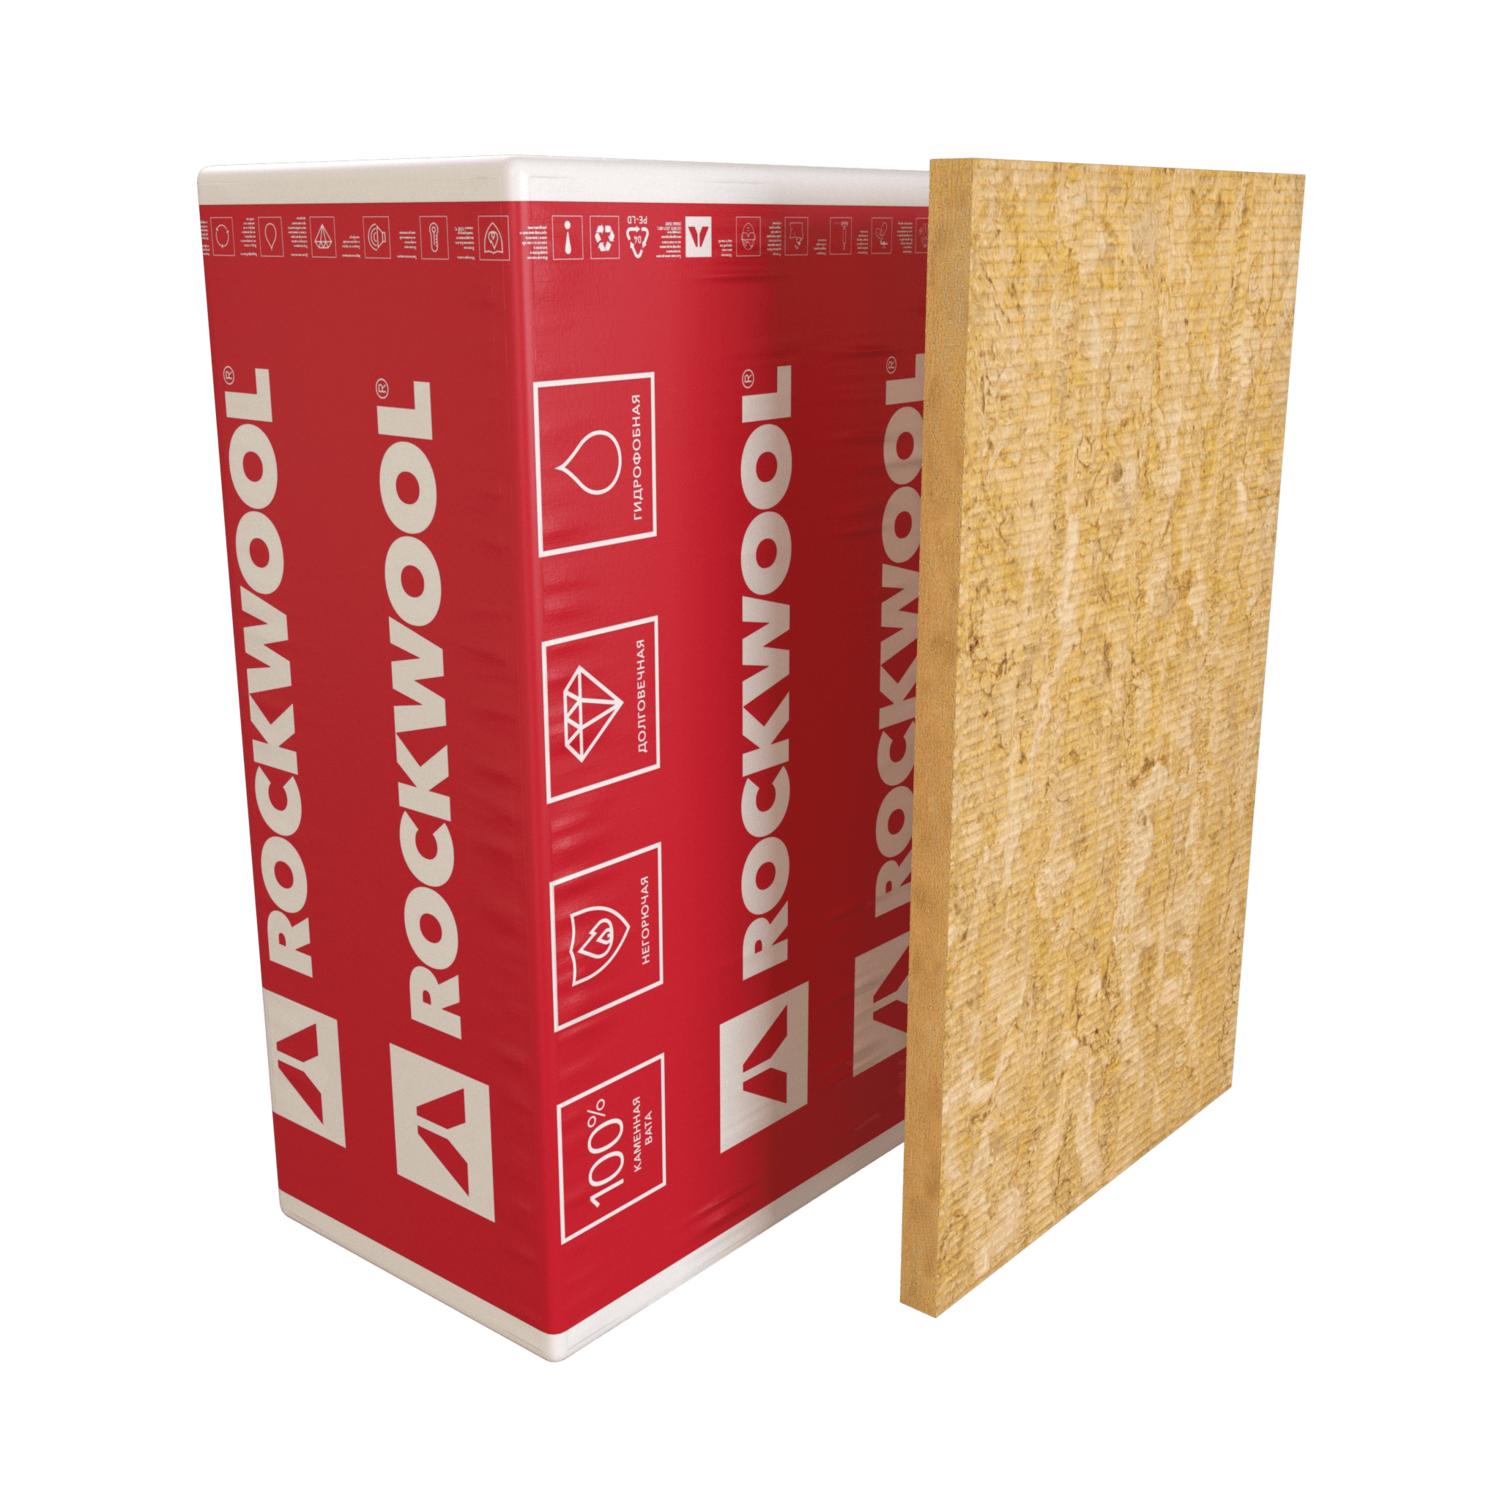 <span style="font-weight: bold;">rockwool Венти баттс</span><br>